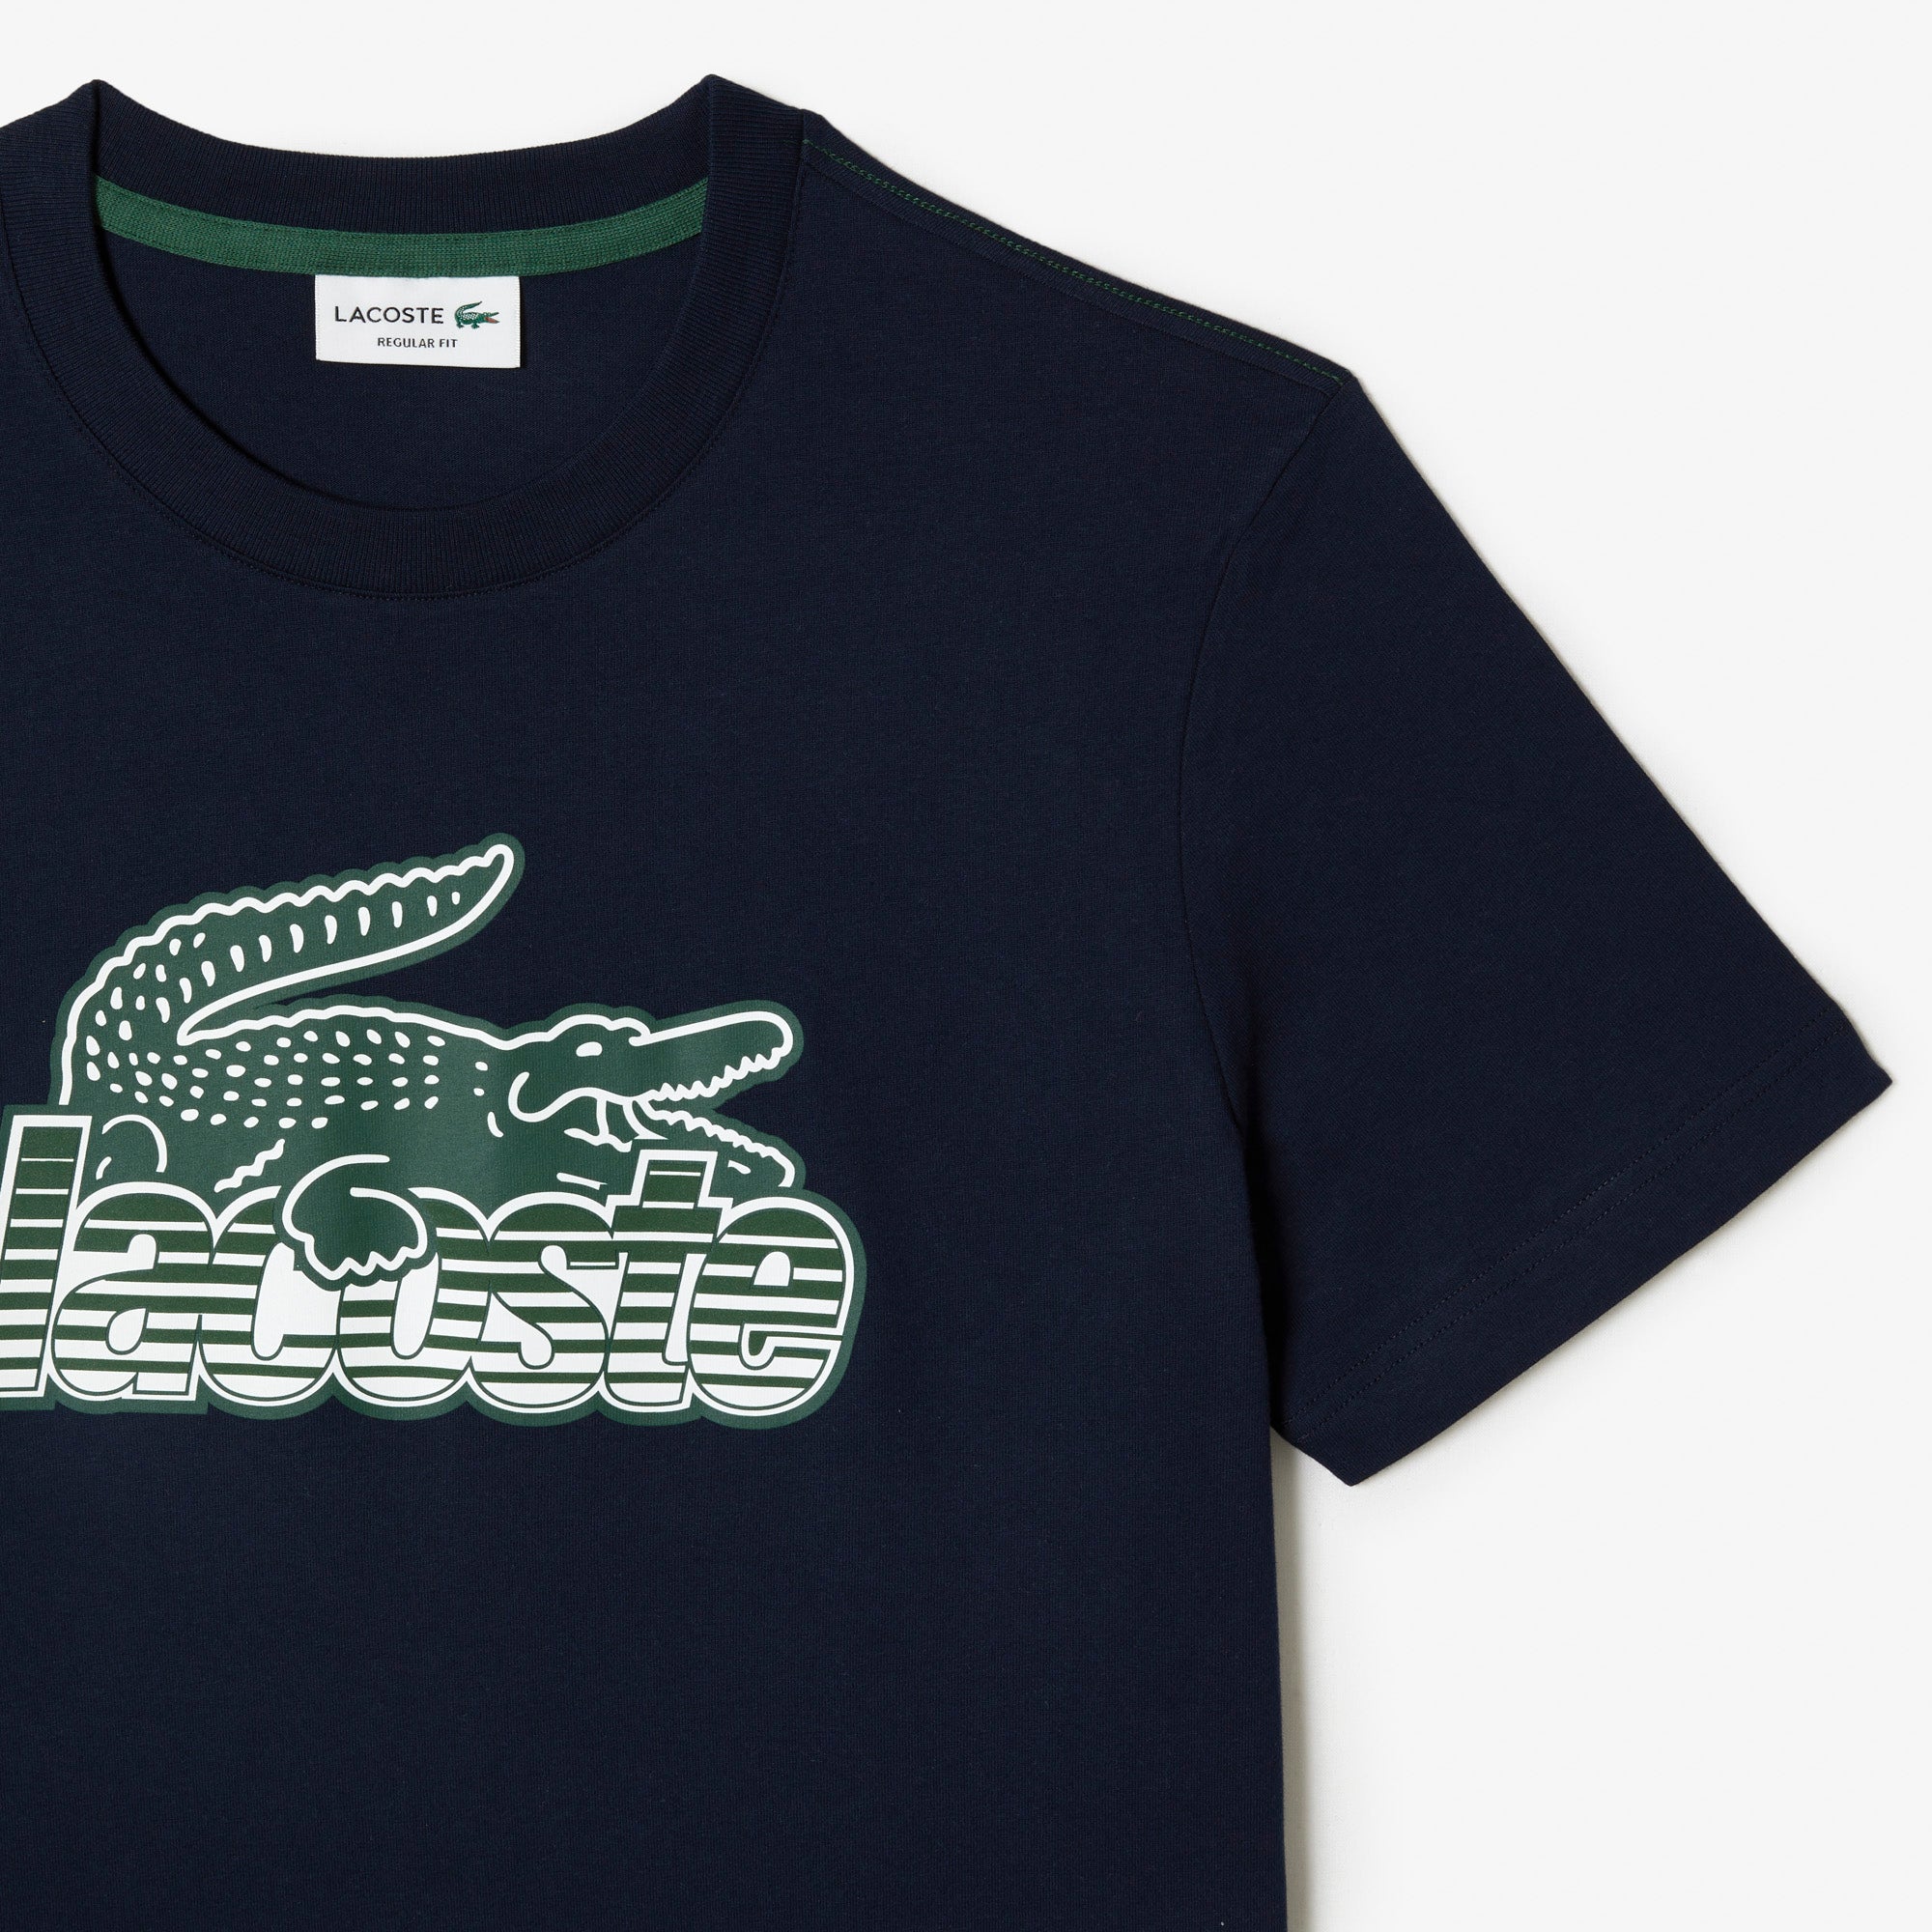 Lacoste Mens Lacoste SPORT Breathable Graphic Print T-shirt Navy Blue